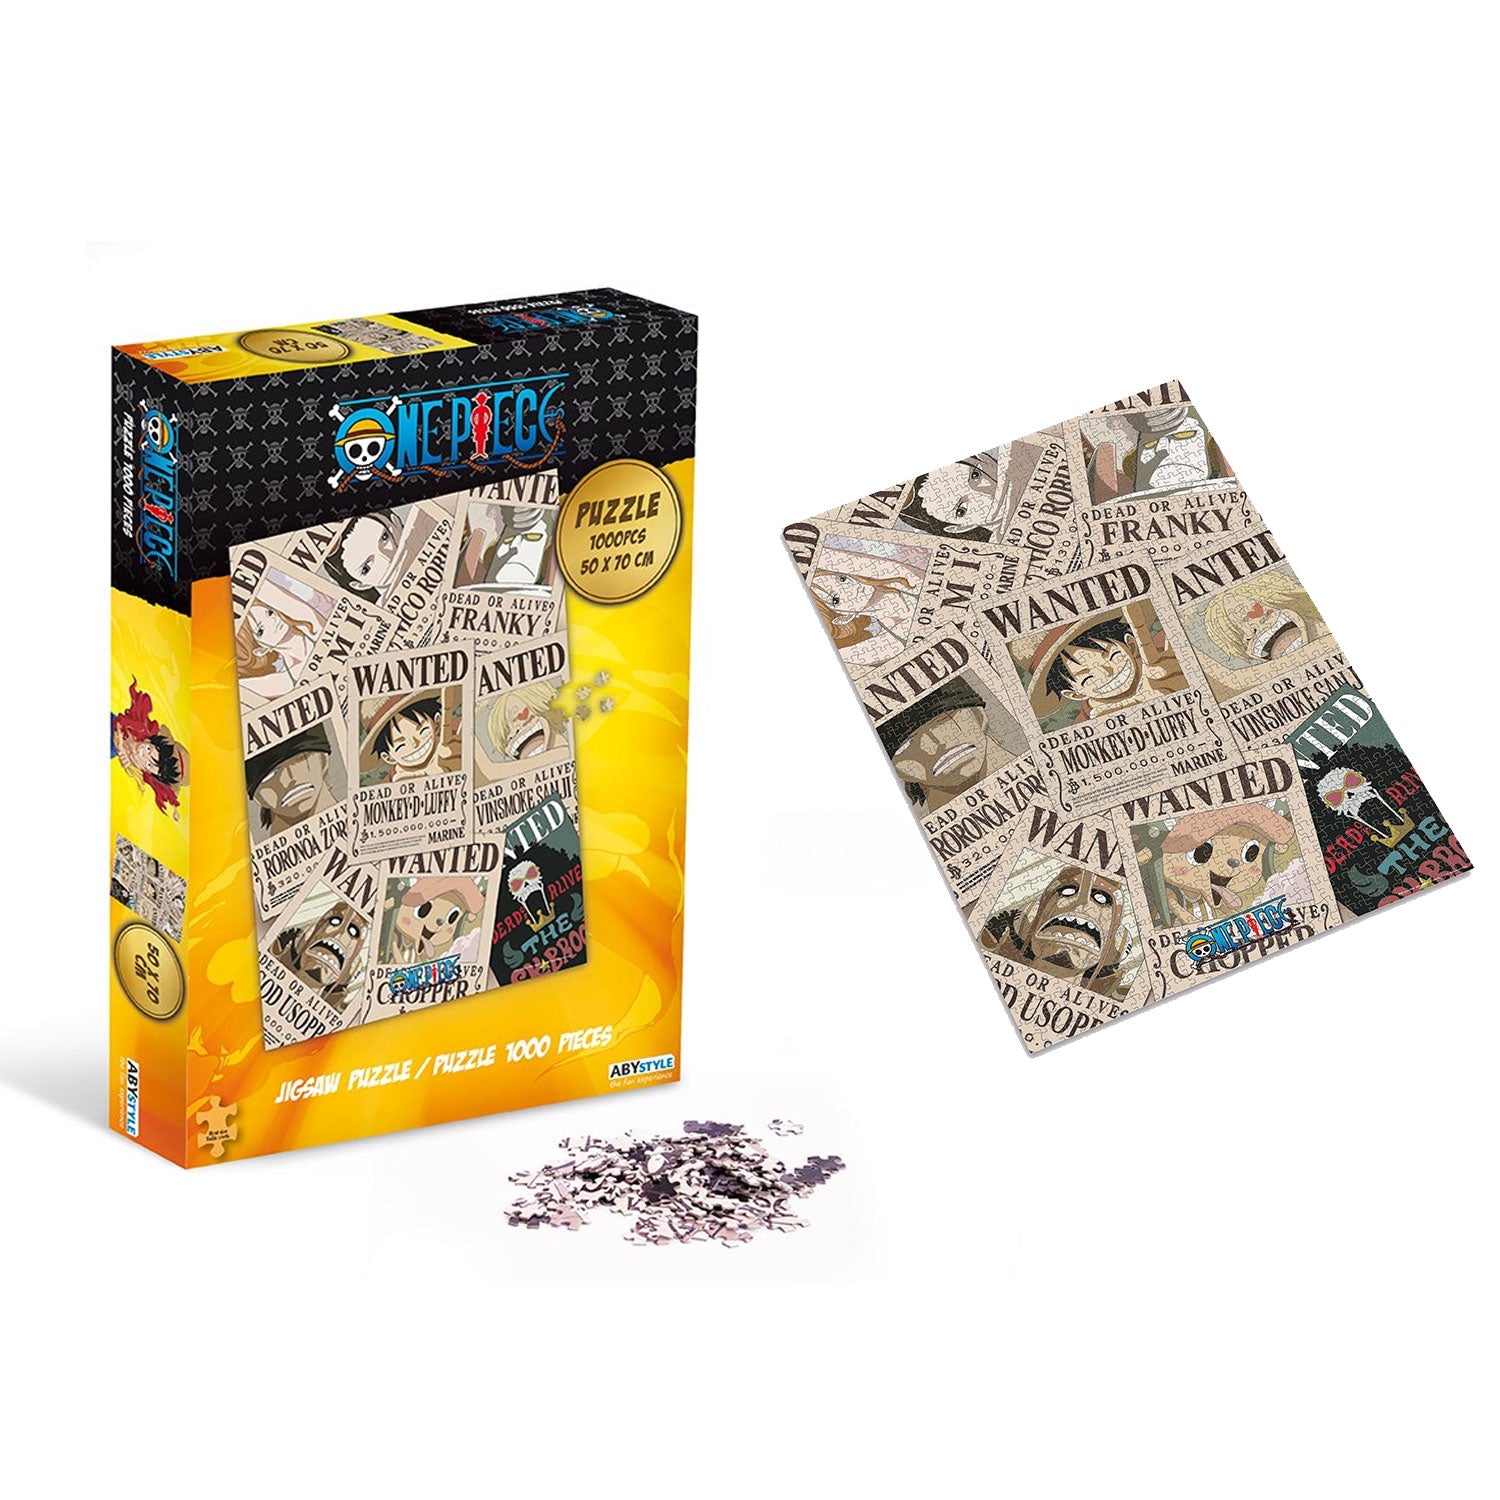 ABYstyle ONE PIECE Jigsaw Puzzle 1000 pieces Wanted